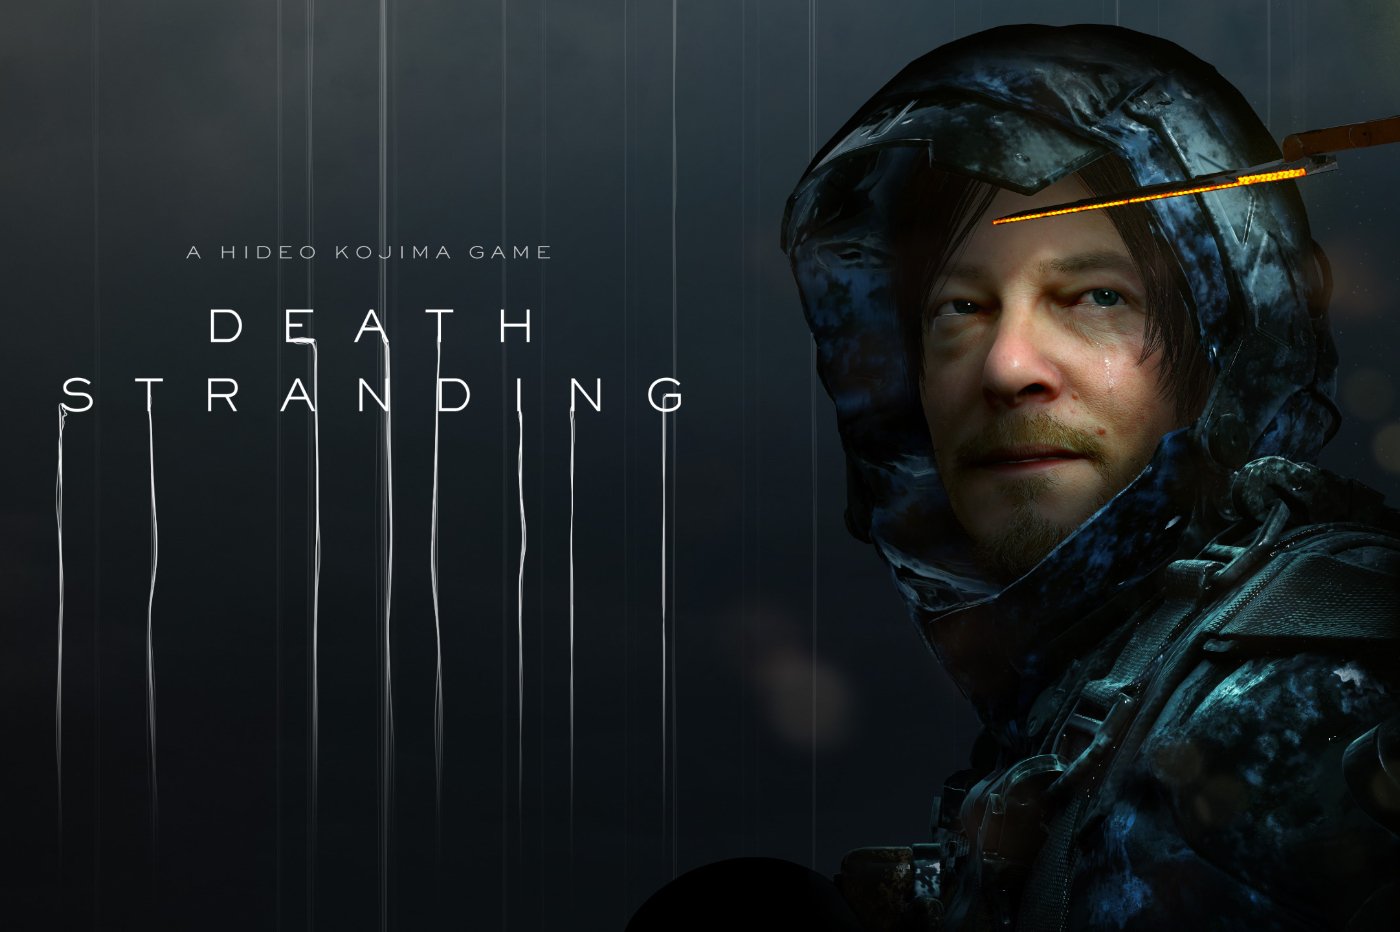 The Epic Games Store was not shocked by the presentation of Death Stranding